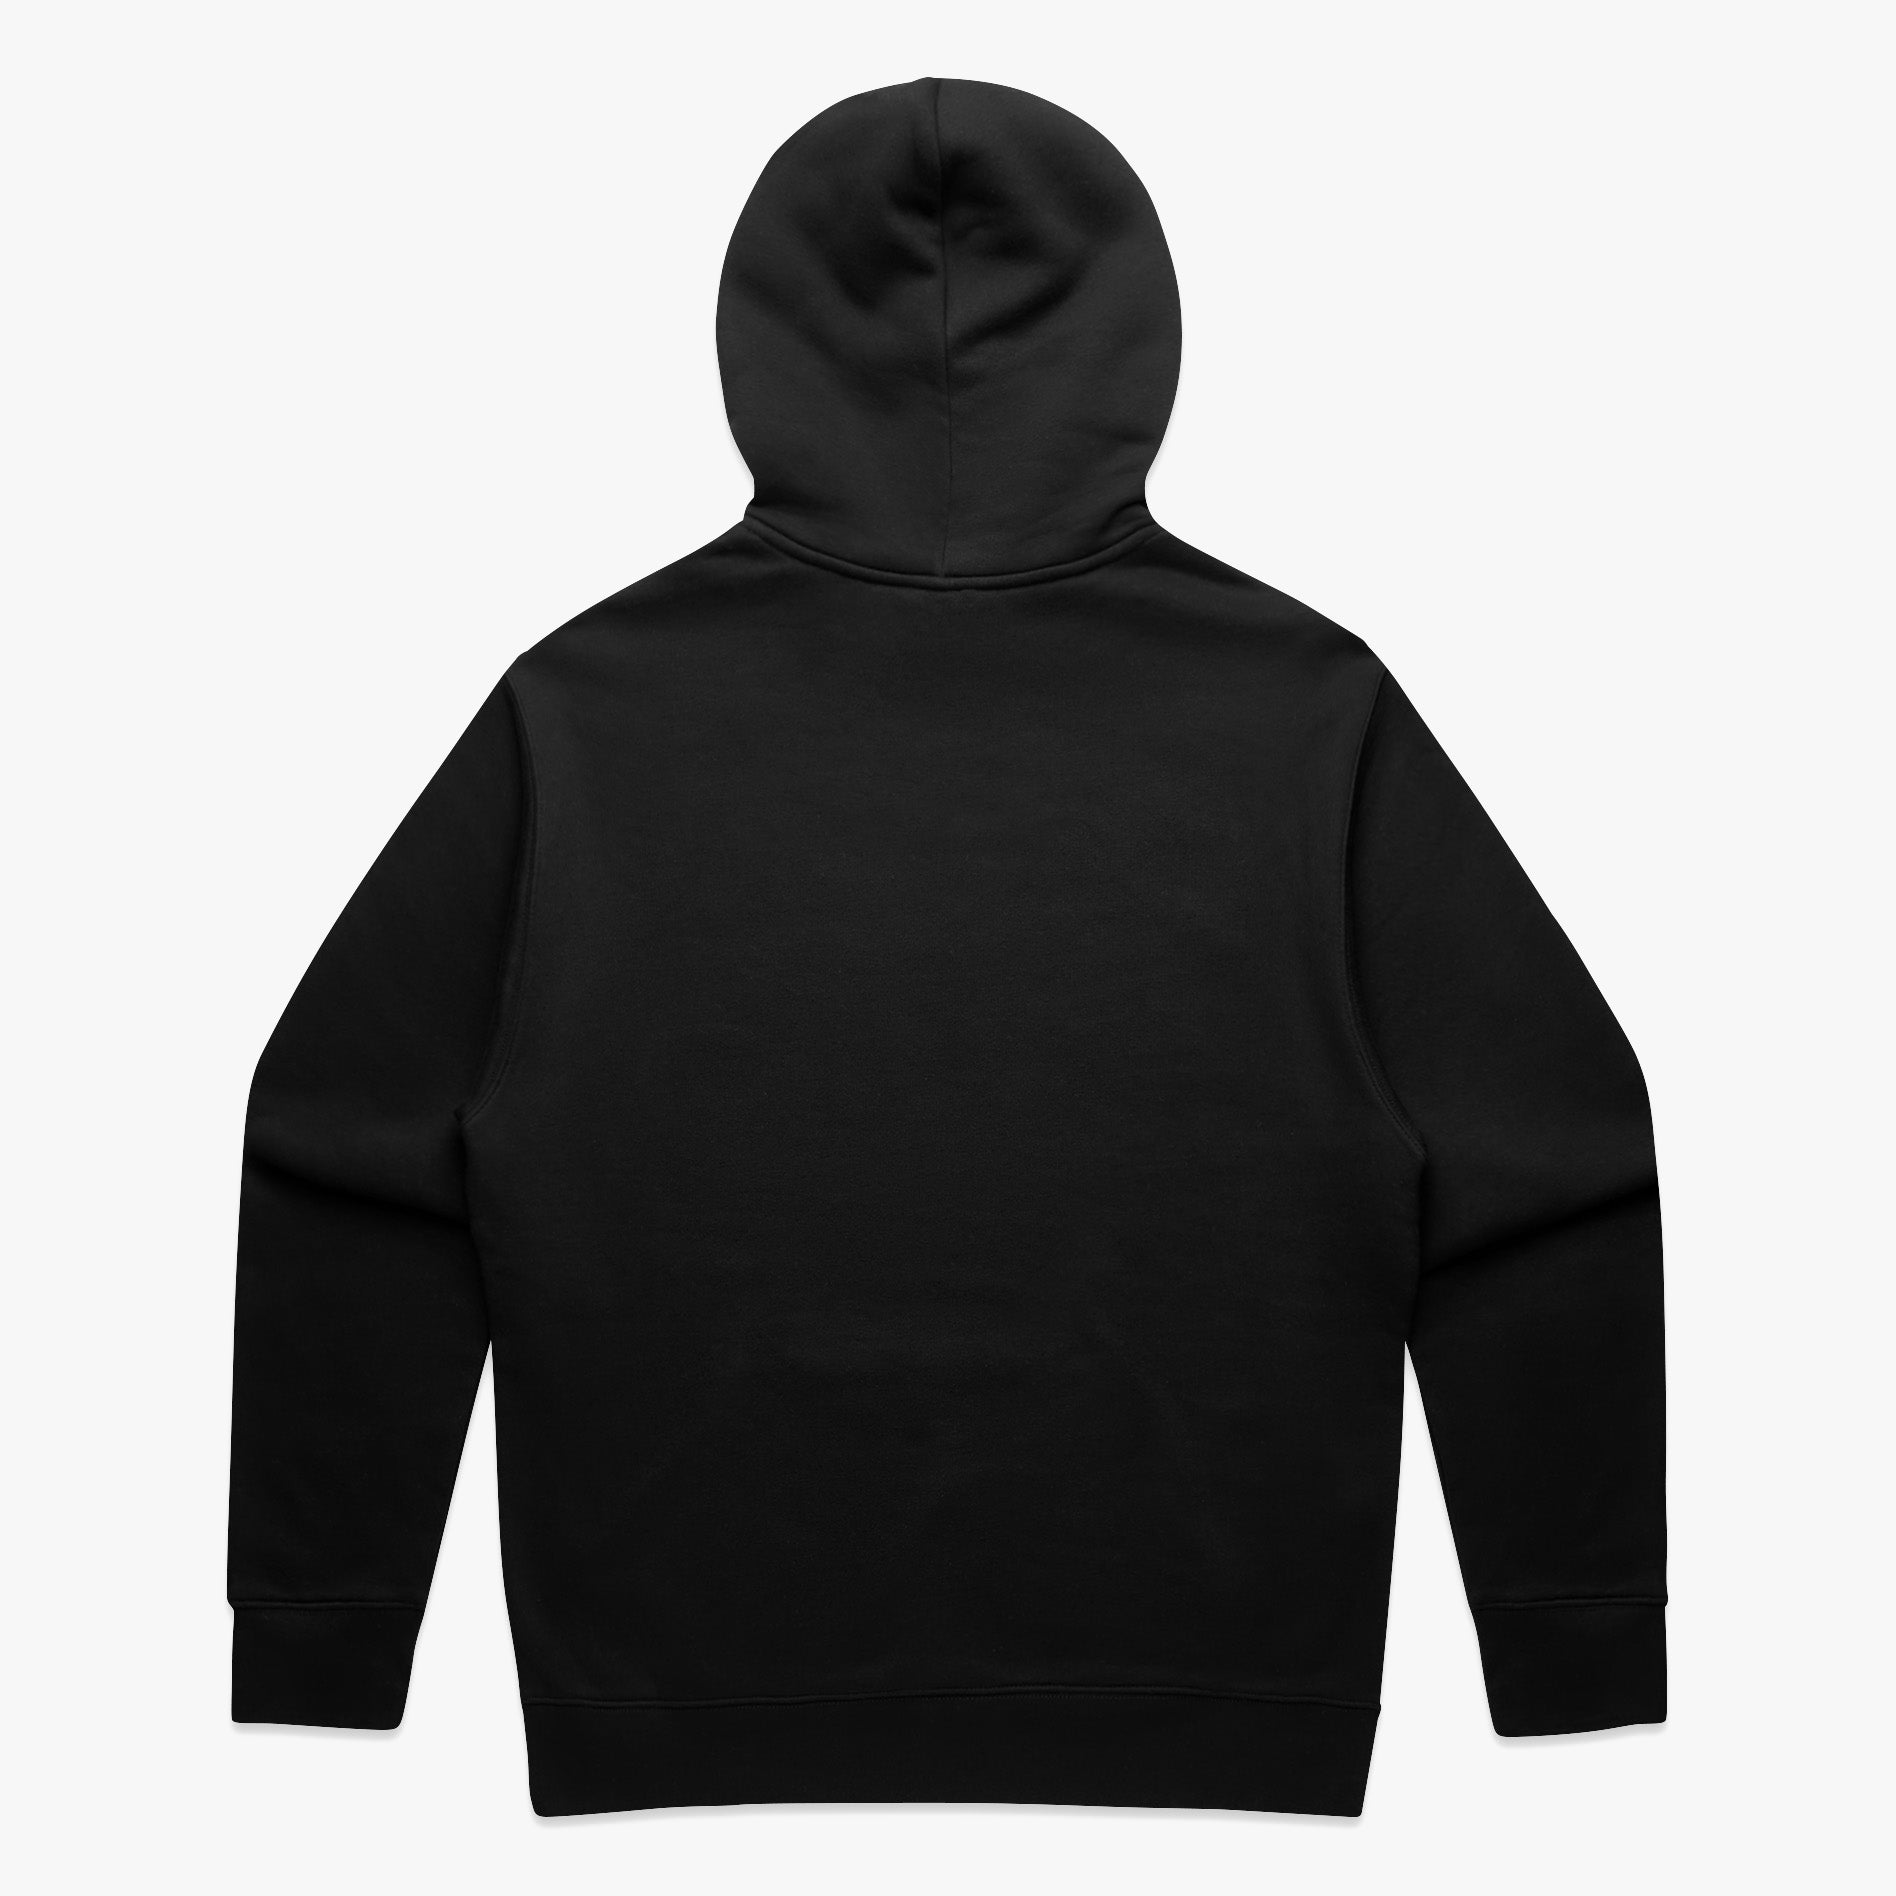 SHEEPEY OG Embroidered Relax Hoodie Black